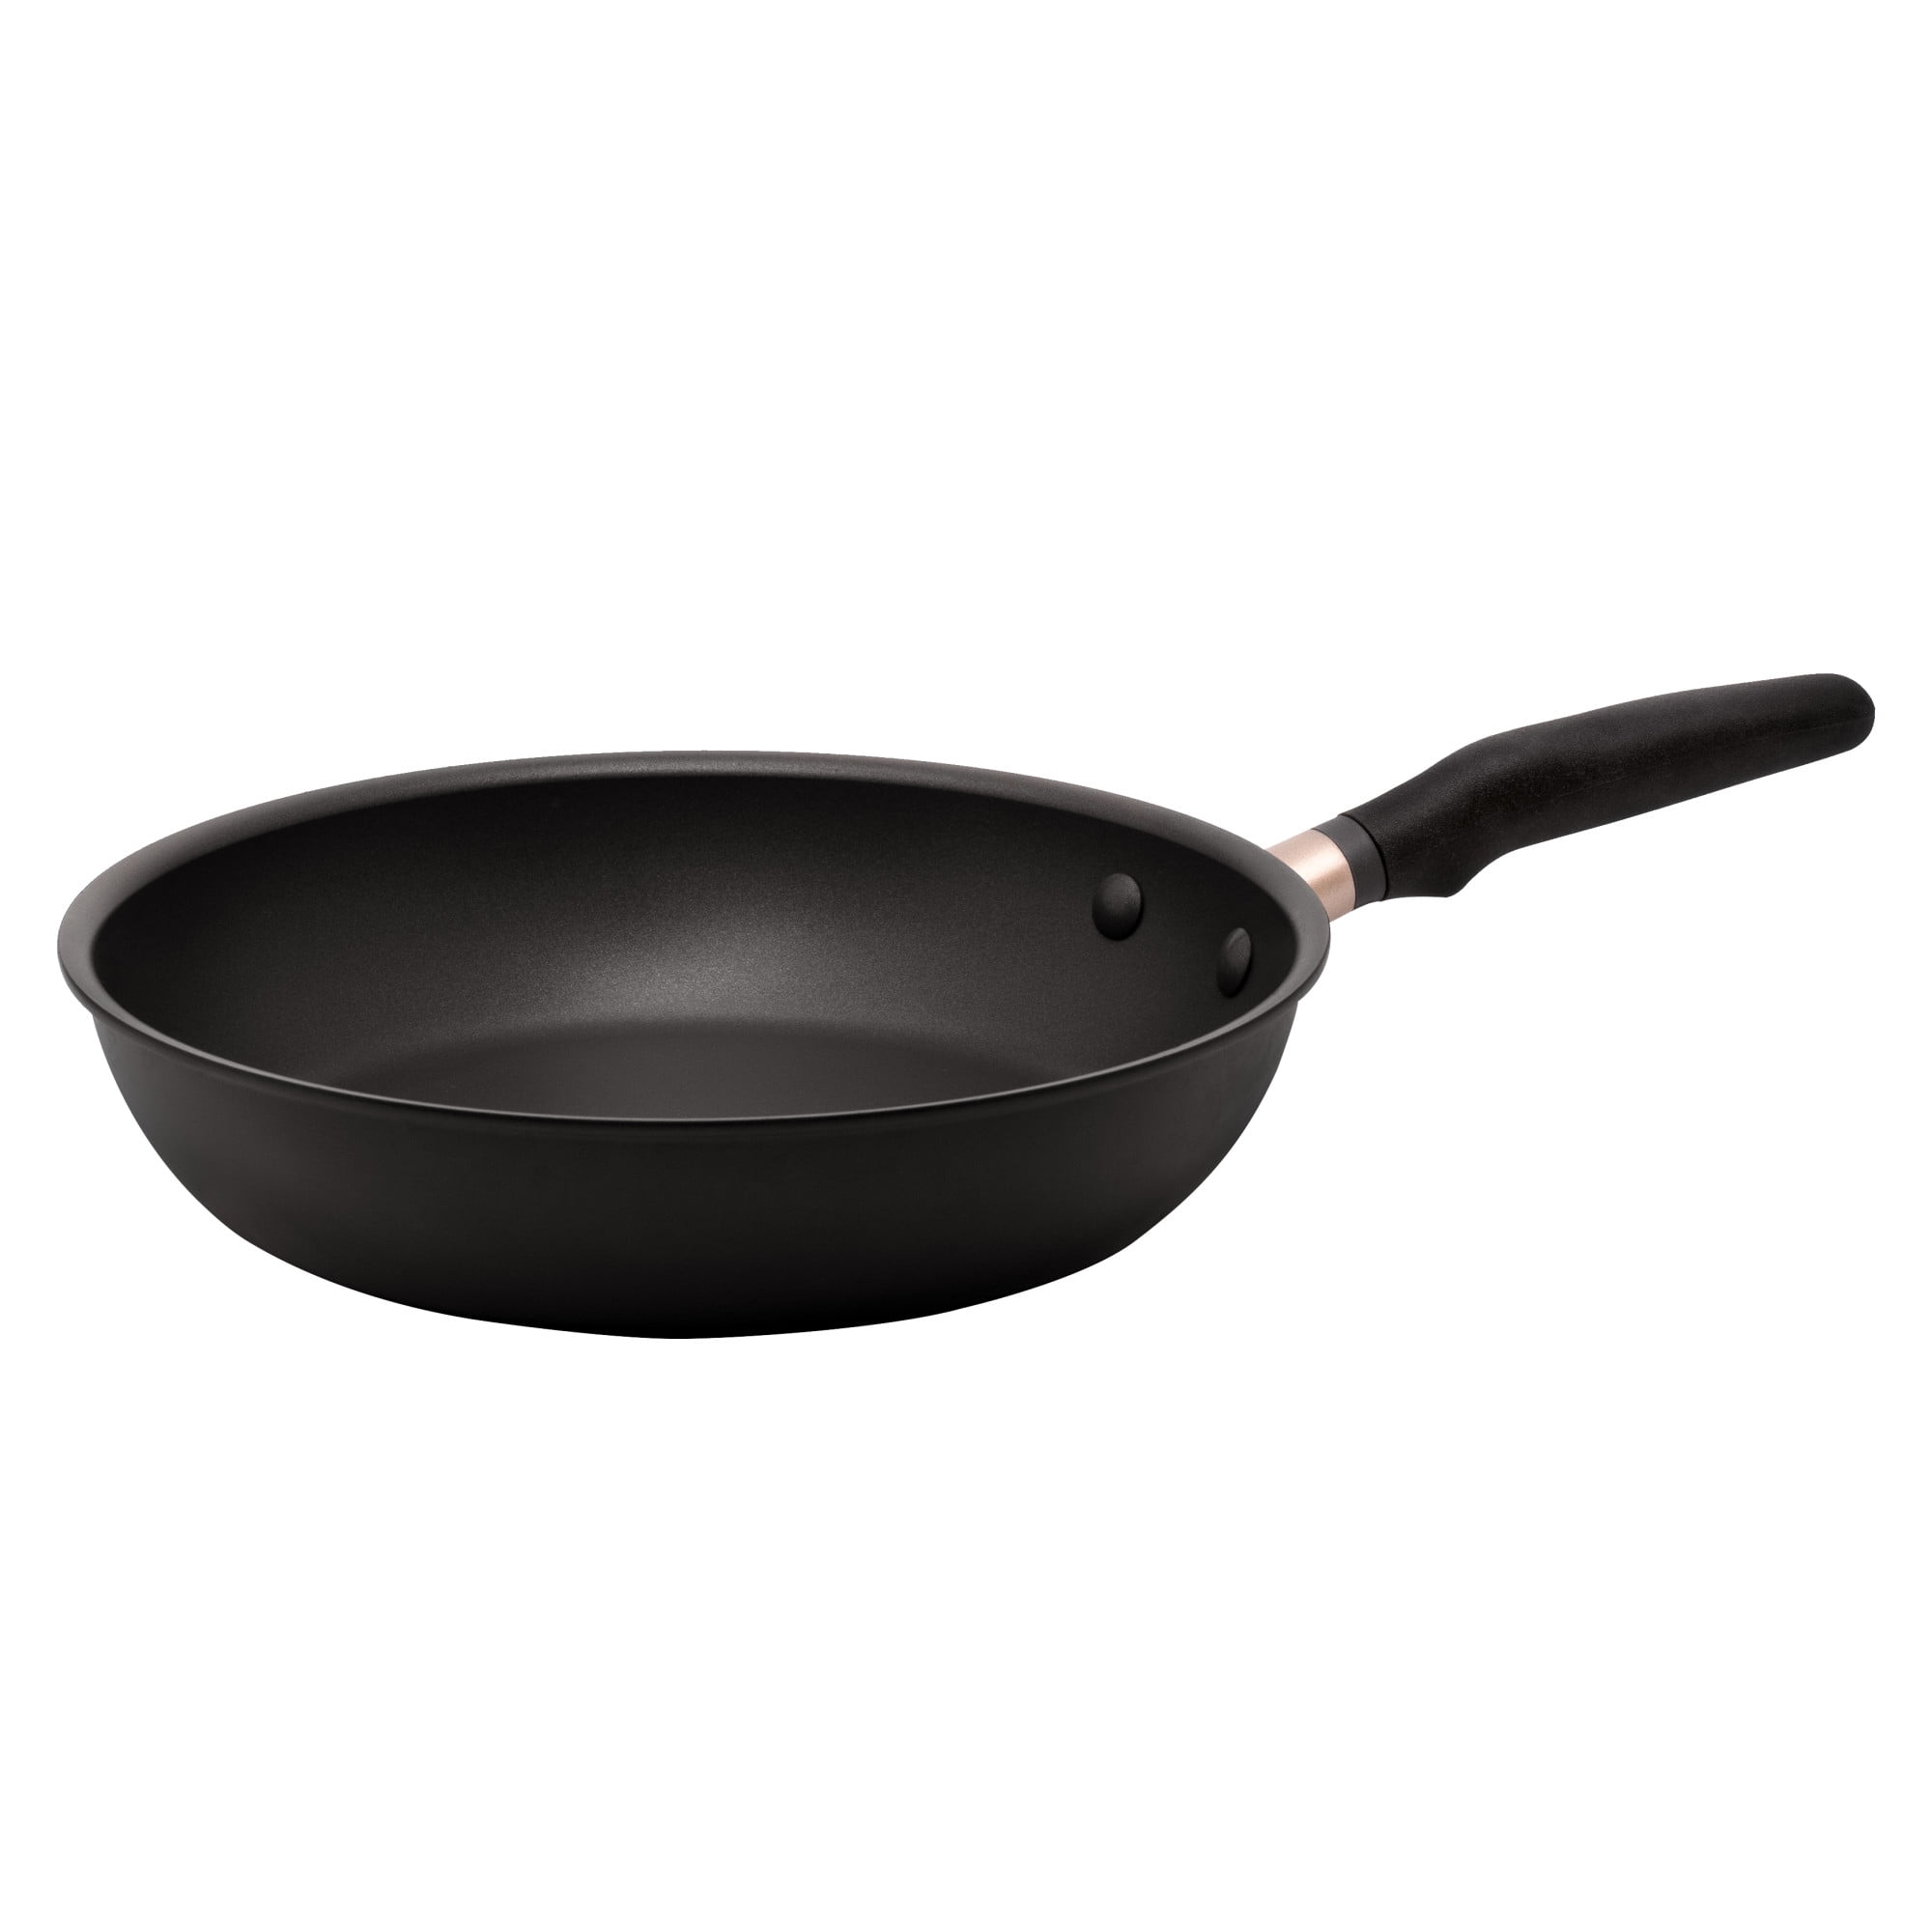 KitchenAid Hard Anodized Induction Frying Pan with Lid  - Best Buy